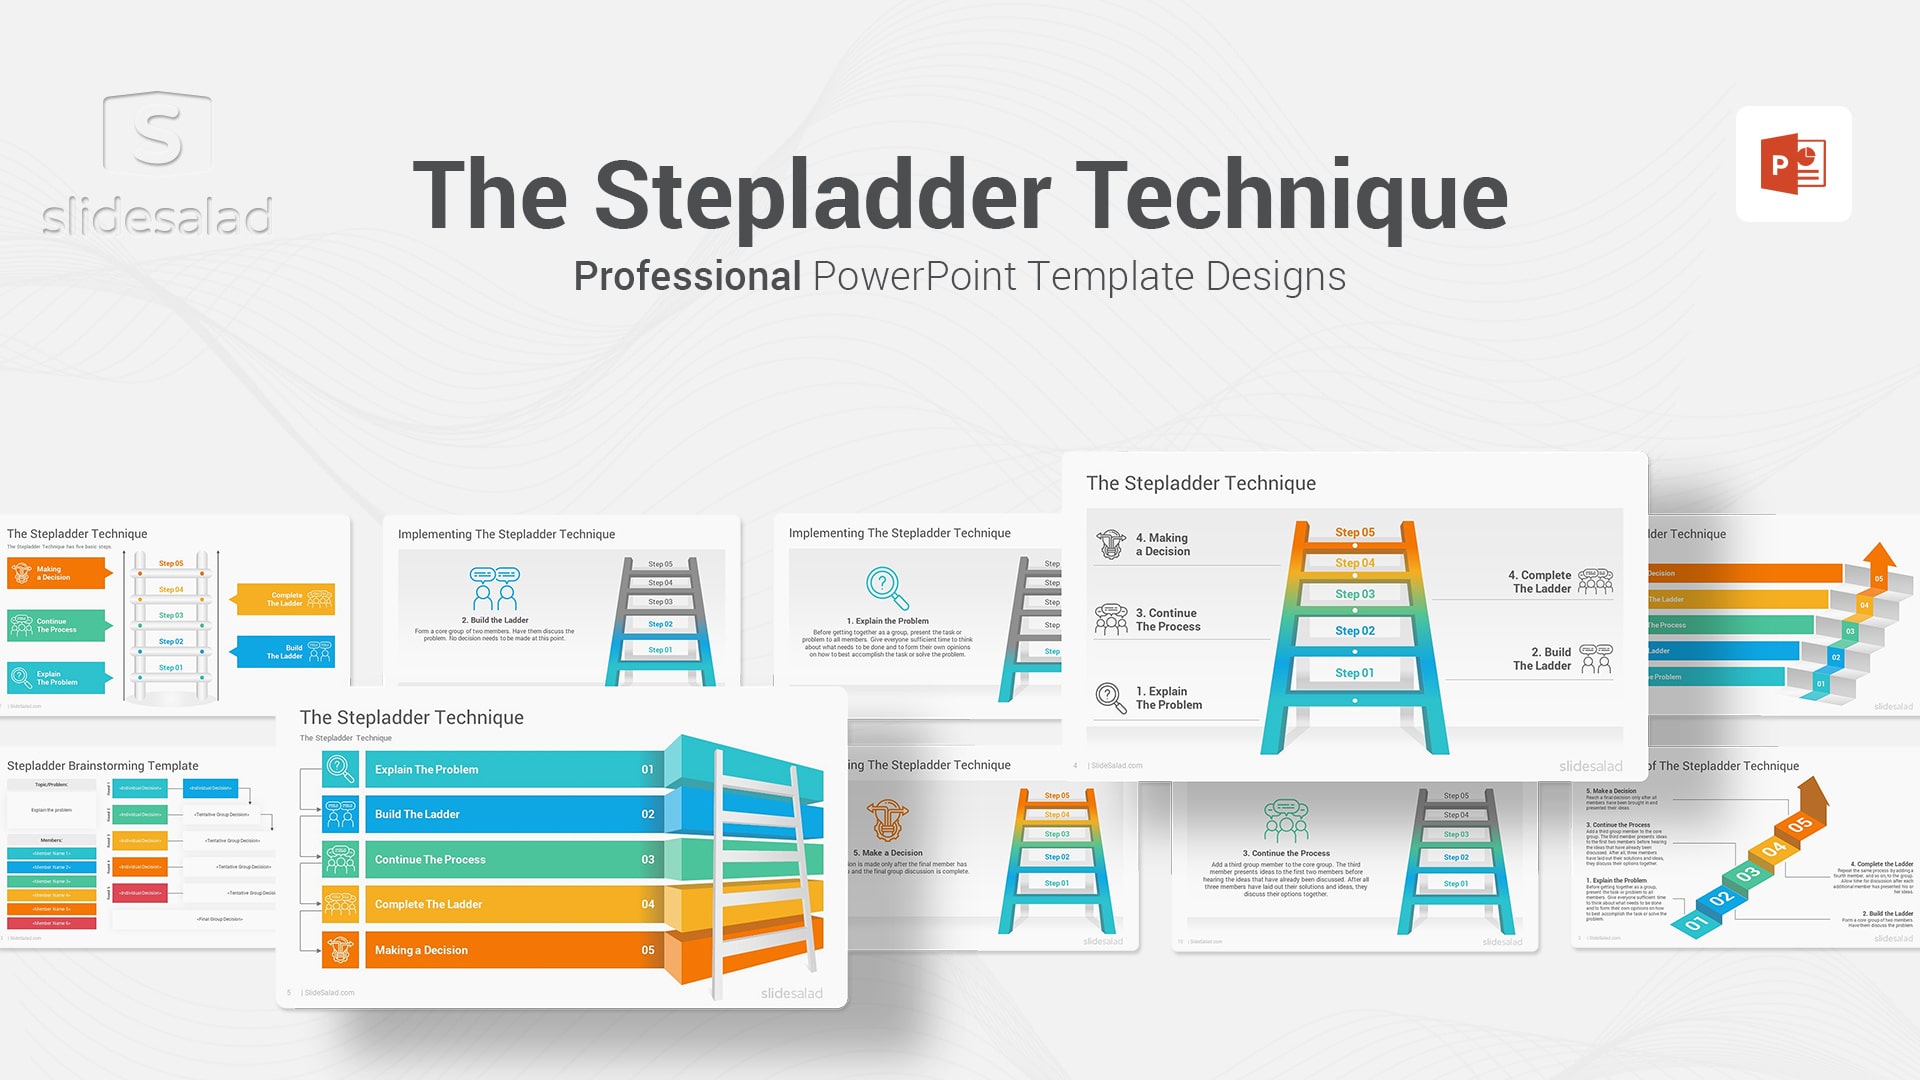 The Stepladder Technique PowerPoint Template Diagrams - Well-Designed PowerPoint Slide Layouts to How to Use the Step Ladder Technique for an Effective Decision Making